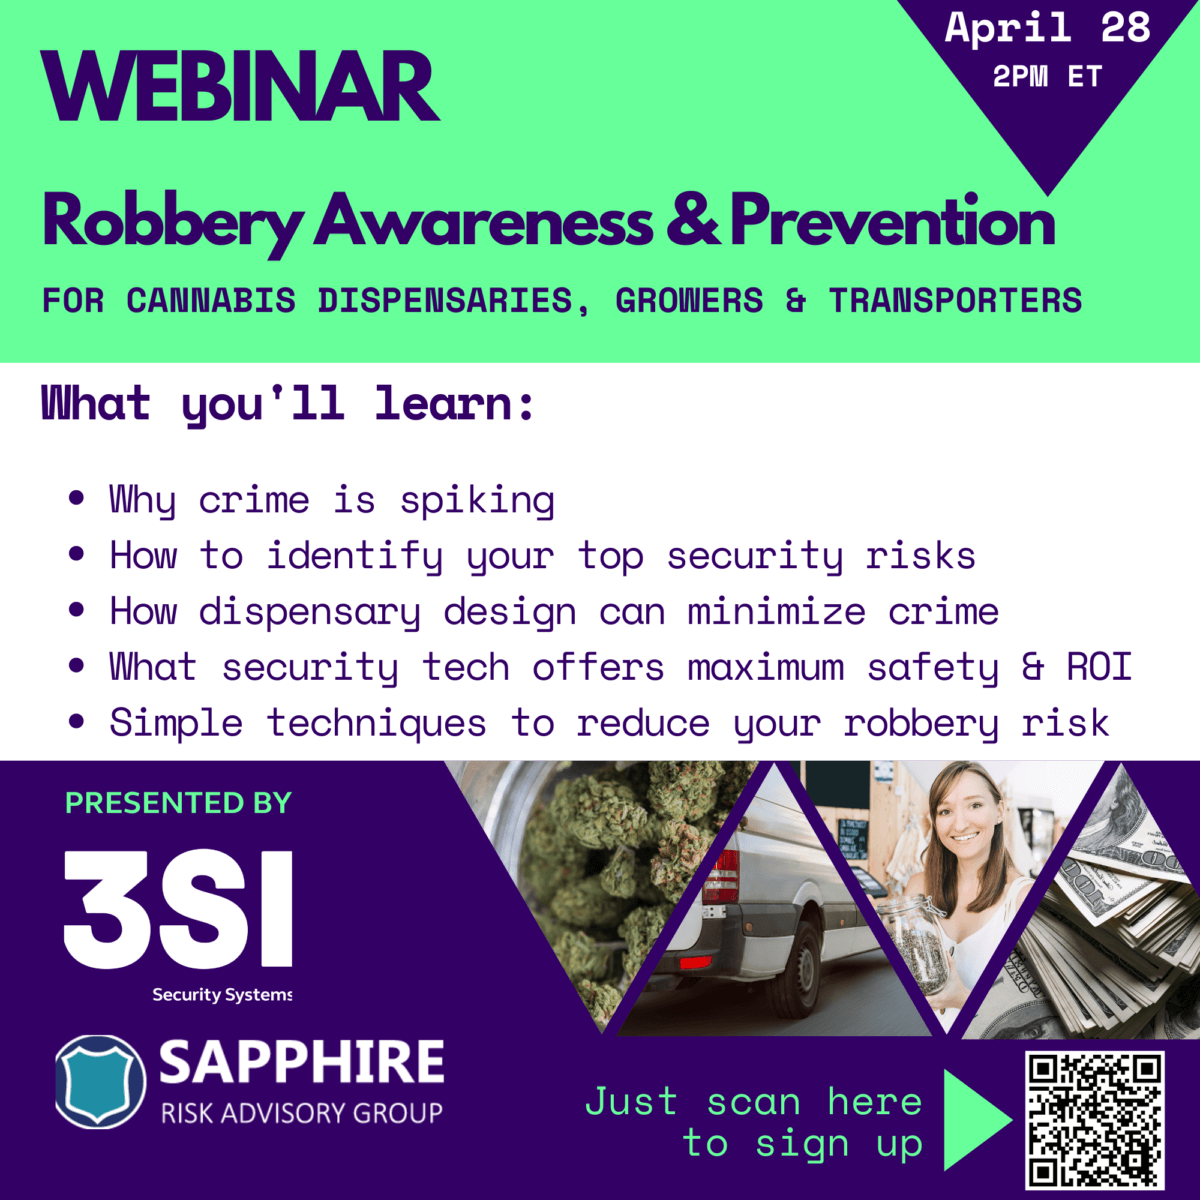 Webinar: Dispensaries have become a prime target for armed robberies and burglaries